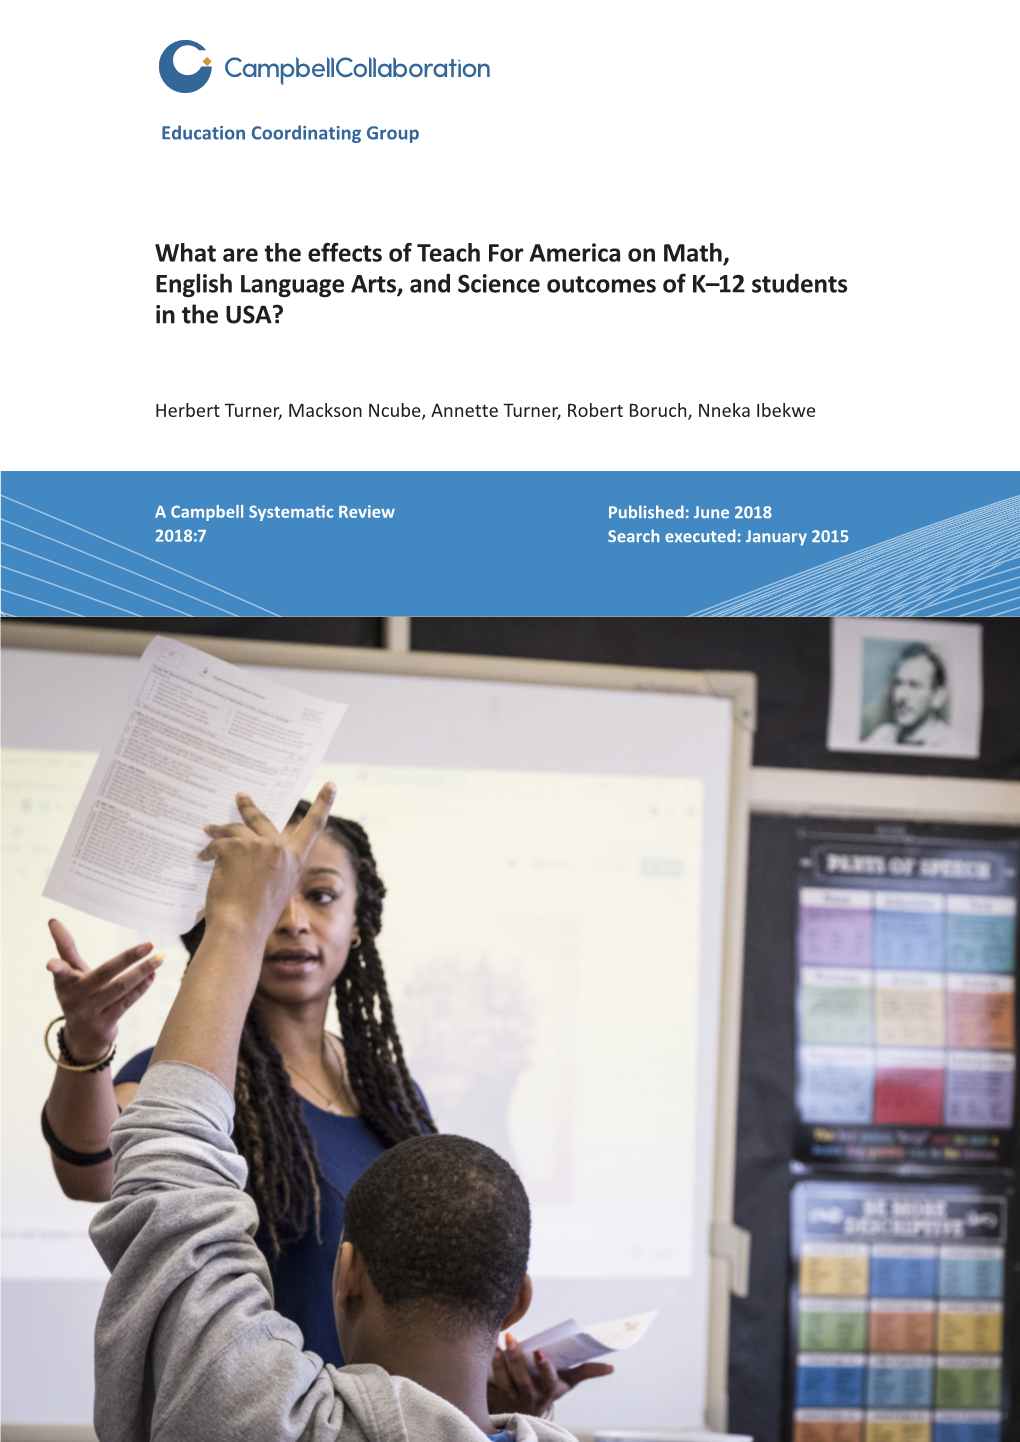 What Are the Effects of Teach for America on Math, English Language Arts, and Science Outcomes of K–12 Students in the USA?